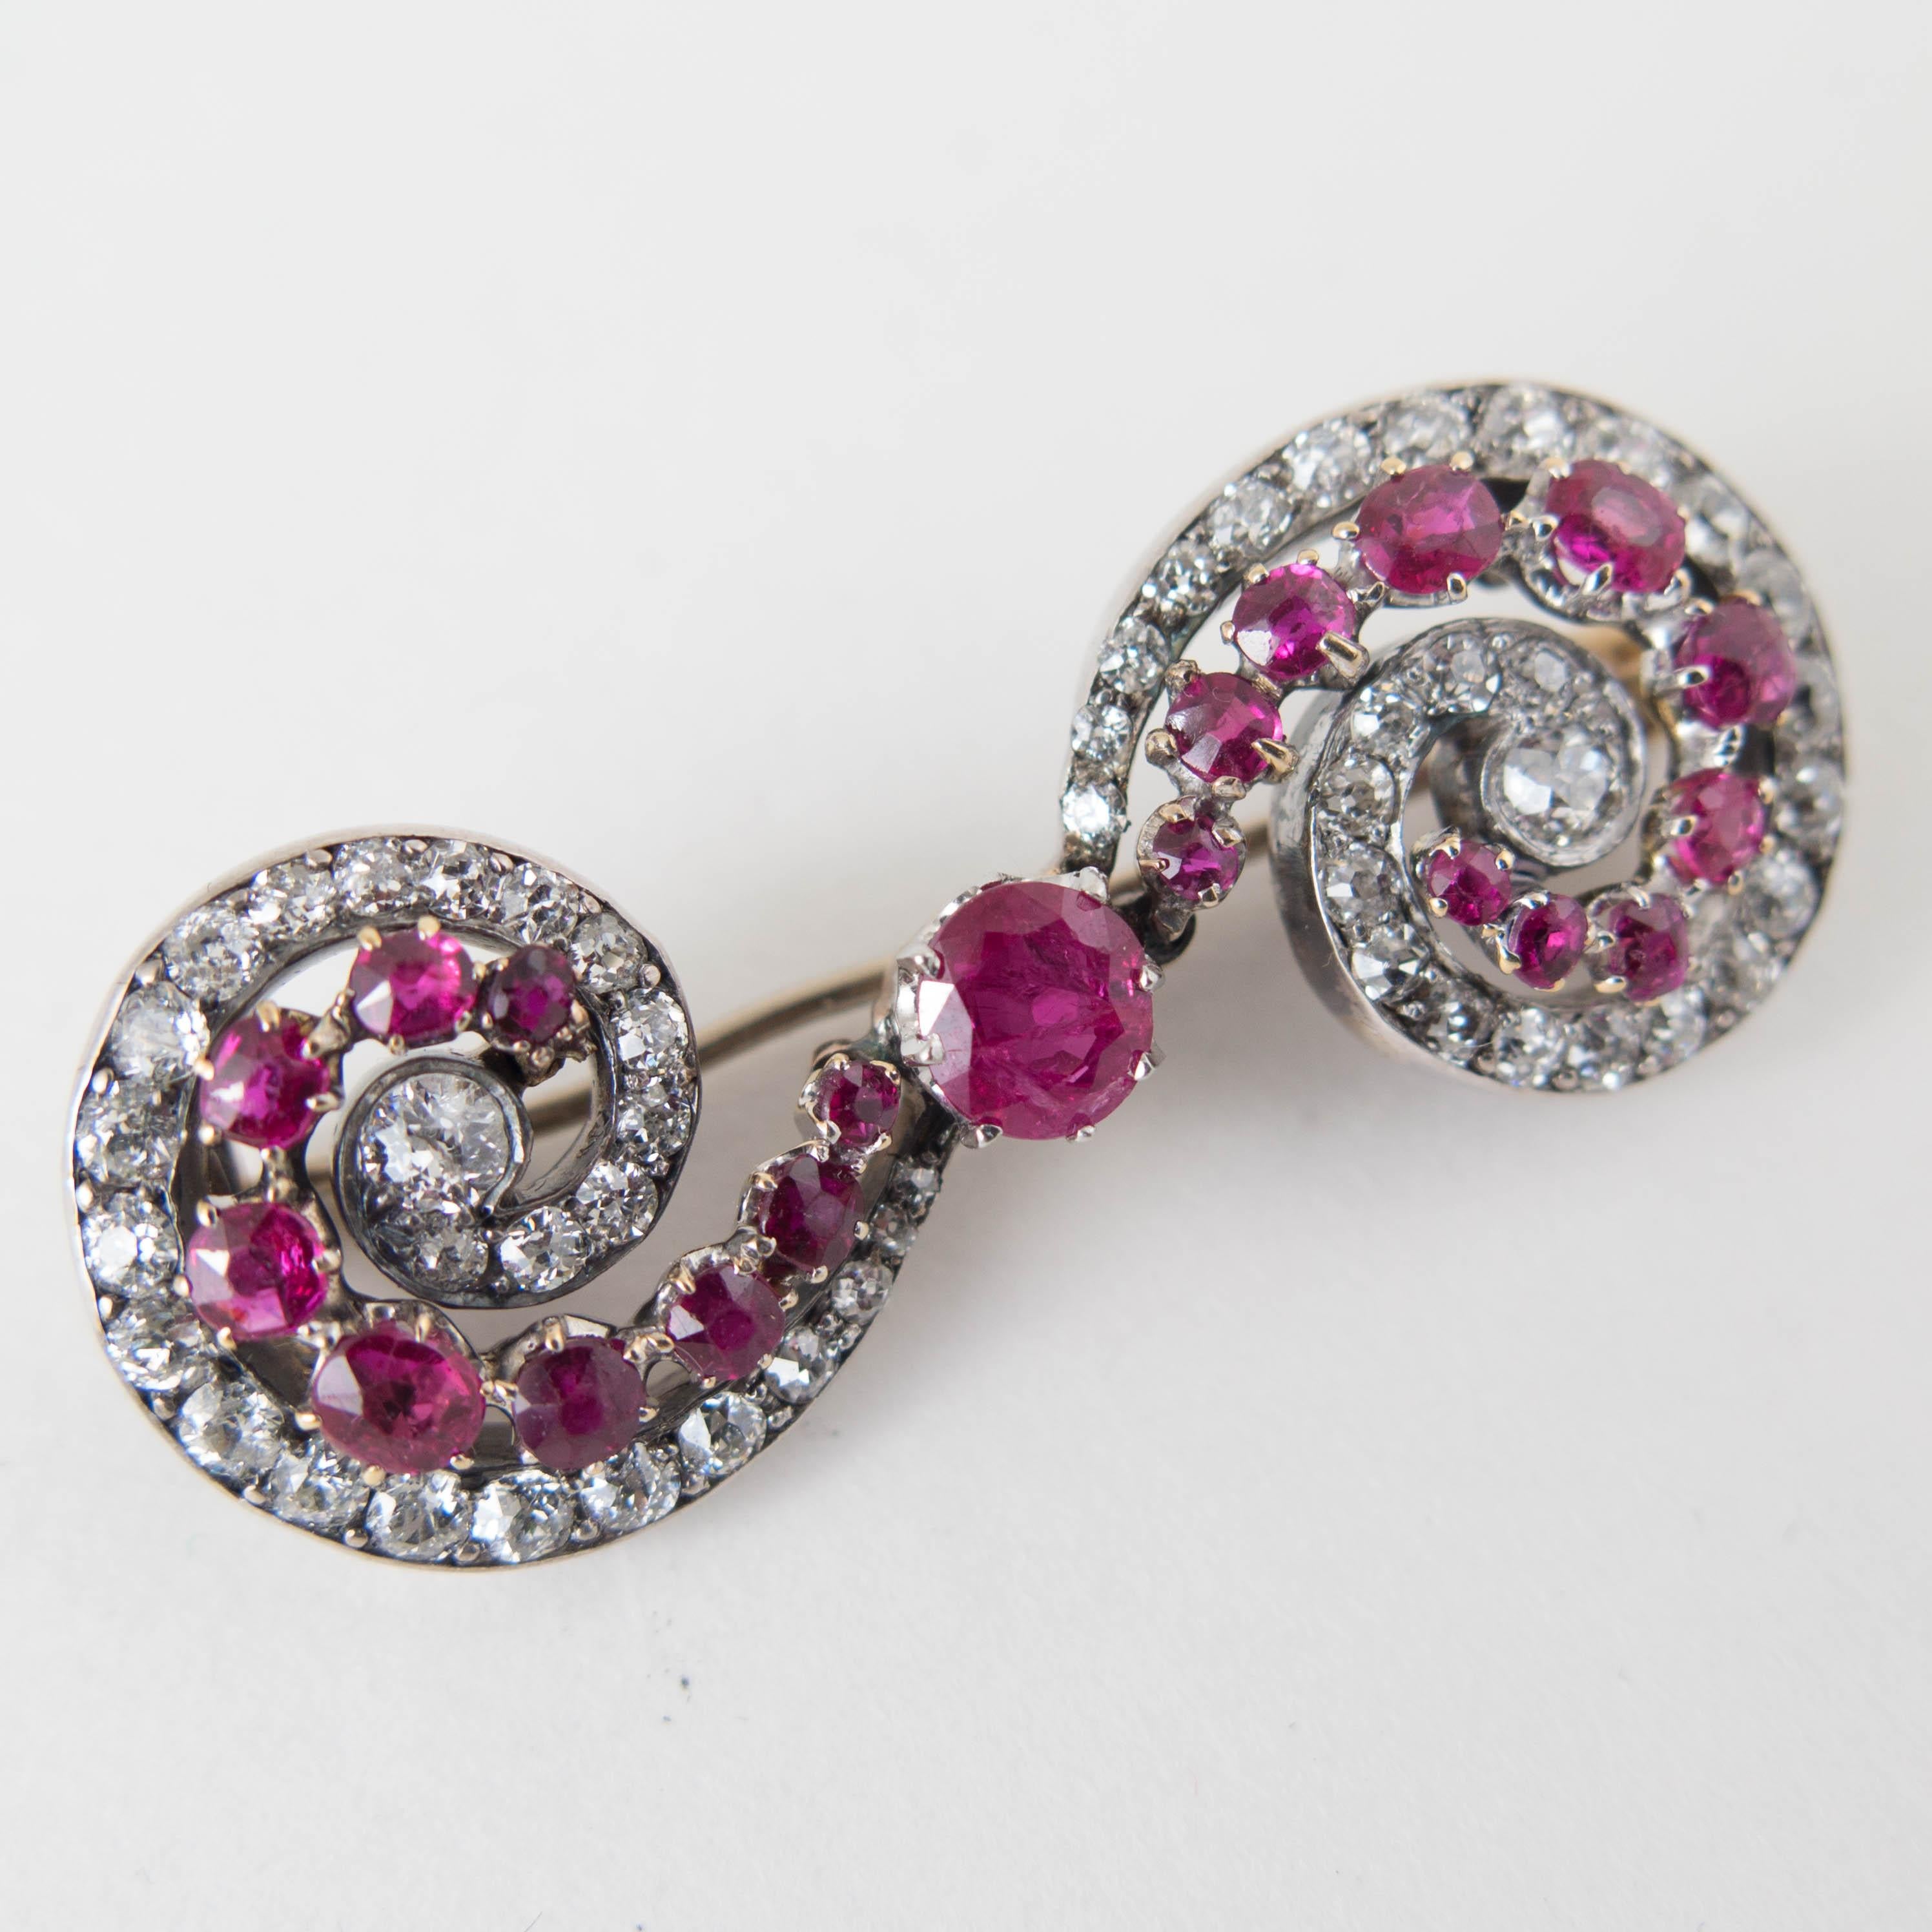 A wonderful late 19th century Victorian ruby and diamond scroll or swirl brooch set in silver topped 18k gold.

The small brooch of impeccable design, featuring two opposing swirl or scroll patterns centered around a center ruby. 

20 natural rubies